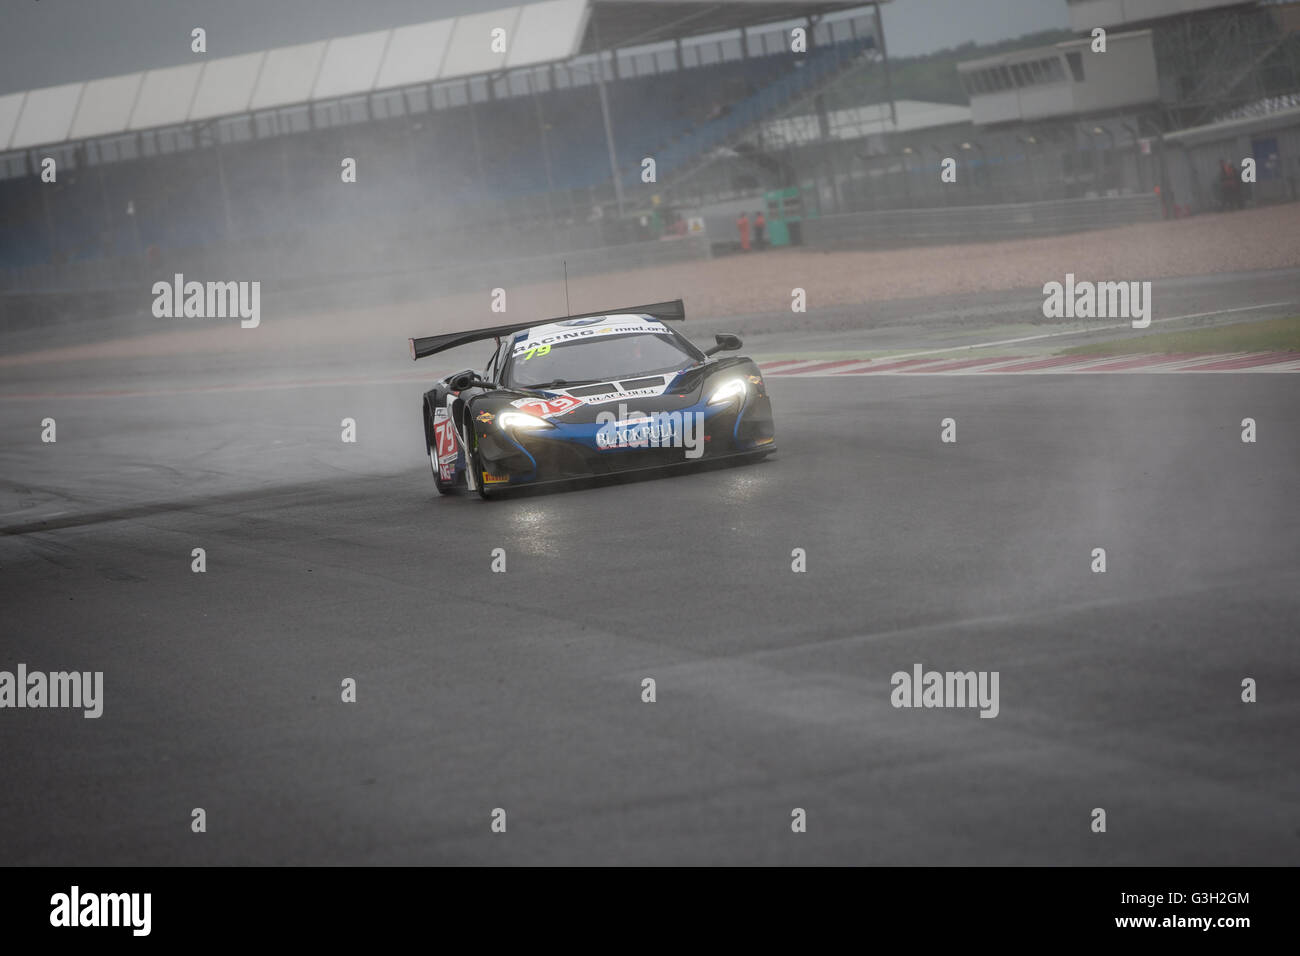 Silverstone, UK. 12th June, 2016. #79 Black Bull Ecurie Ecosse McLaren 650S GT3 of Alasdair McCaig/Rob Bell in the 15 minute warm up Credit:  steven roe/Alamy Live News Stock Photo